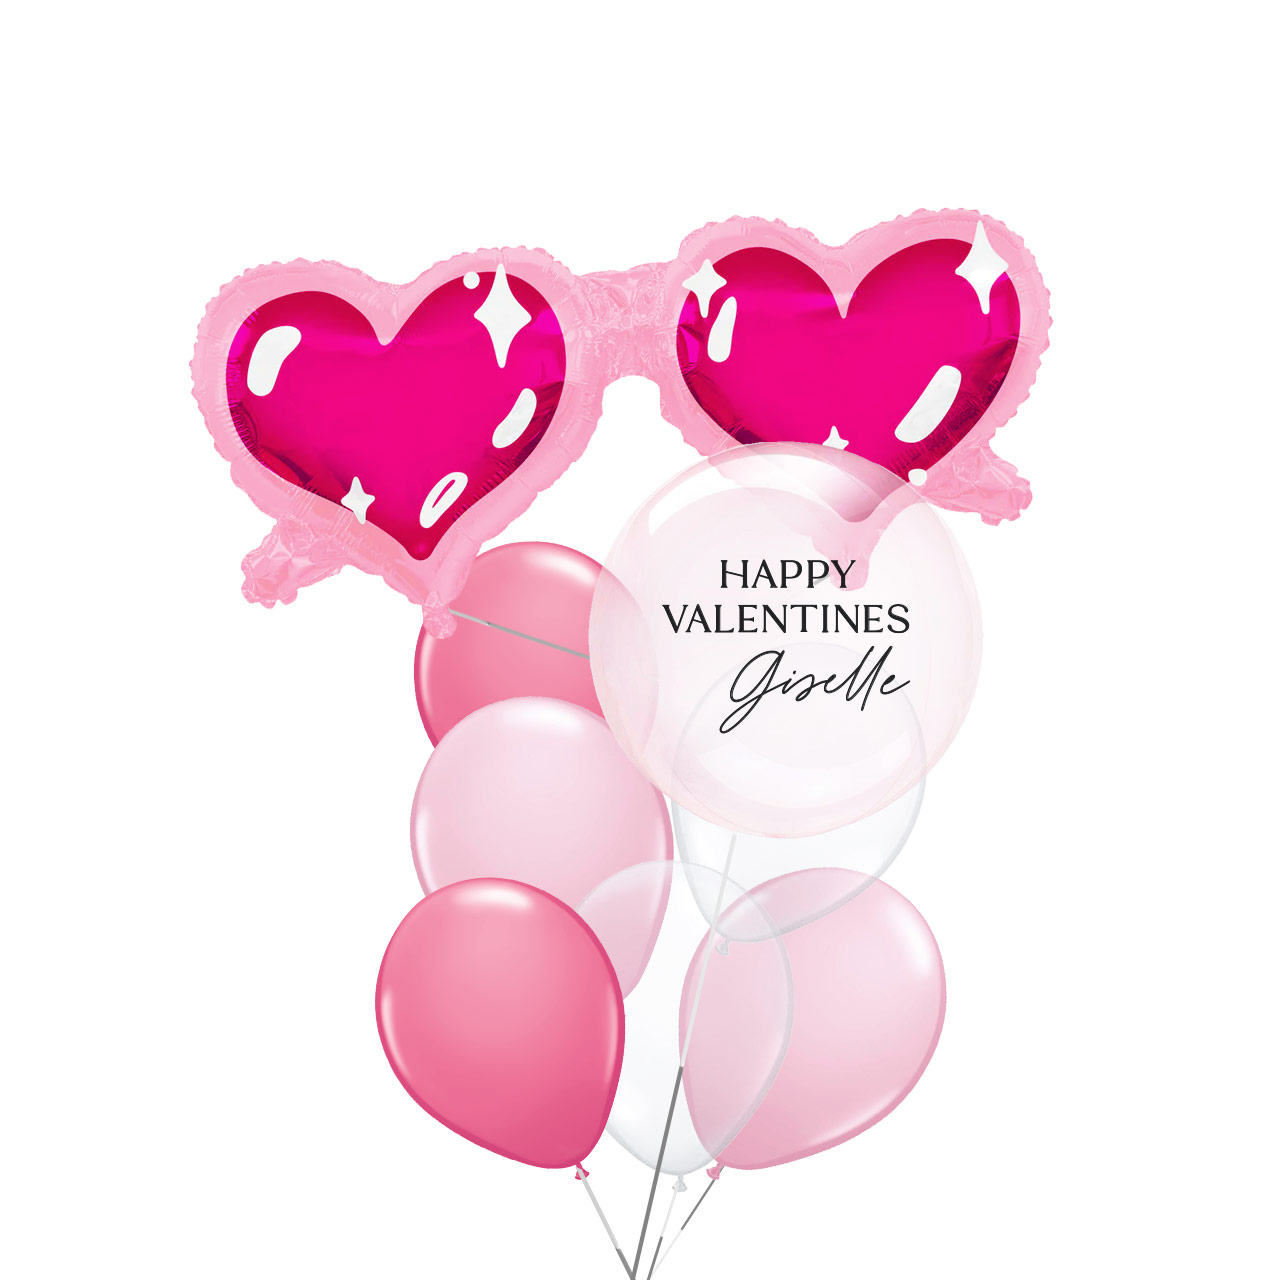 Love at First Sight Foil Balloon with 1 x [Custom/ Plain] Pink Bobo Balloon and 6 Latex Balloons Bouquet